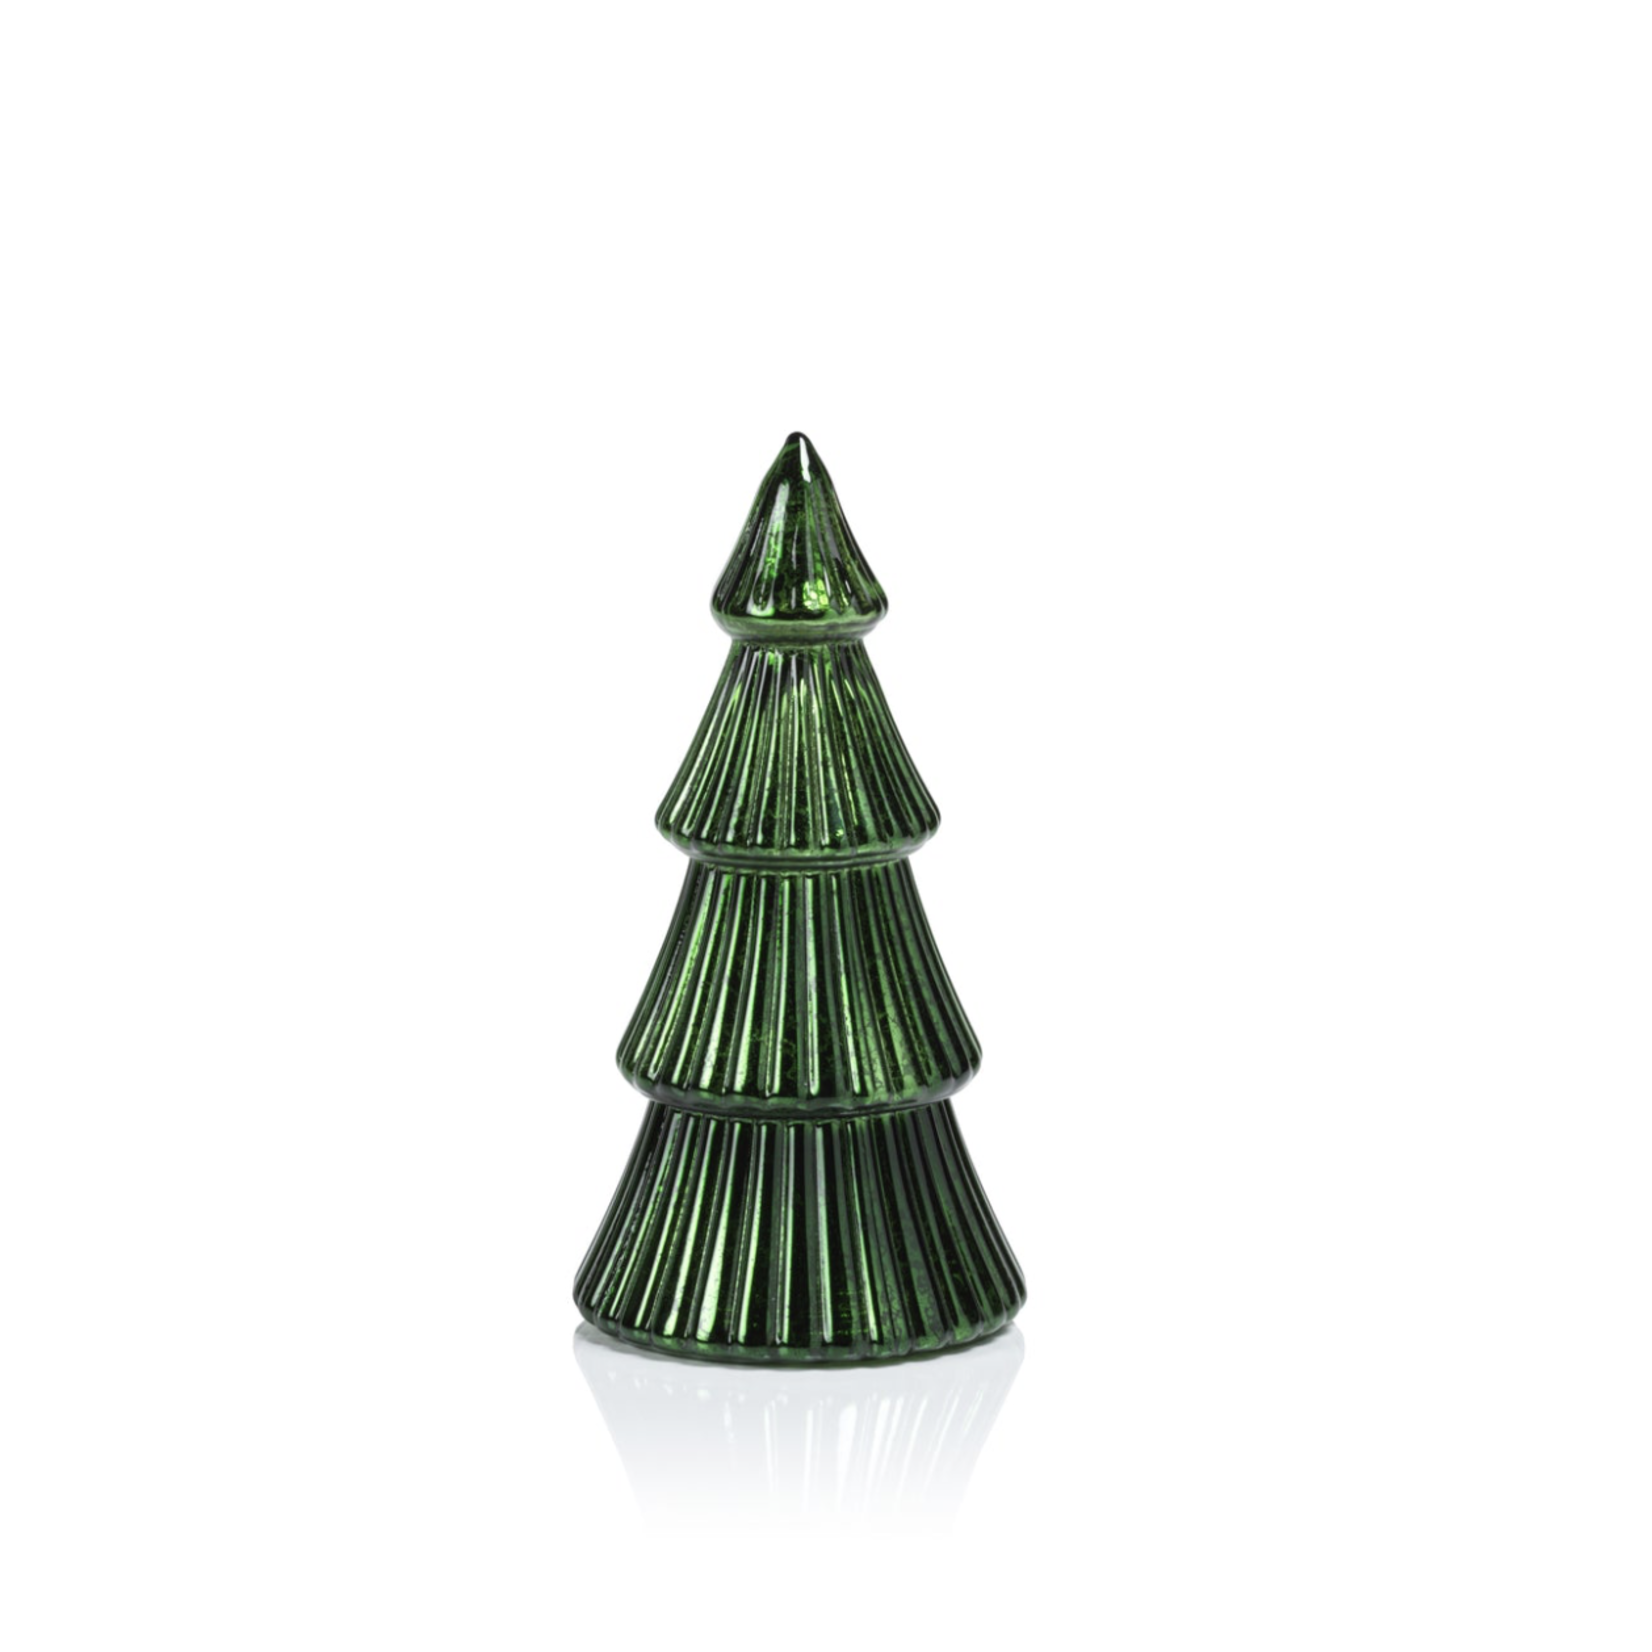 ZODAX Small LED Ribbed Anitique Tree-Green